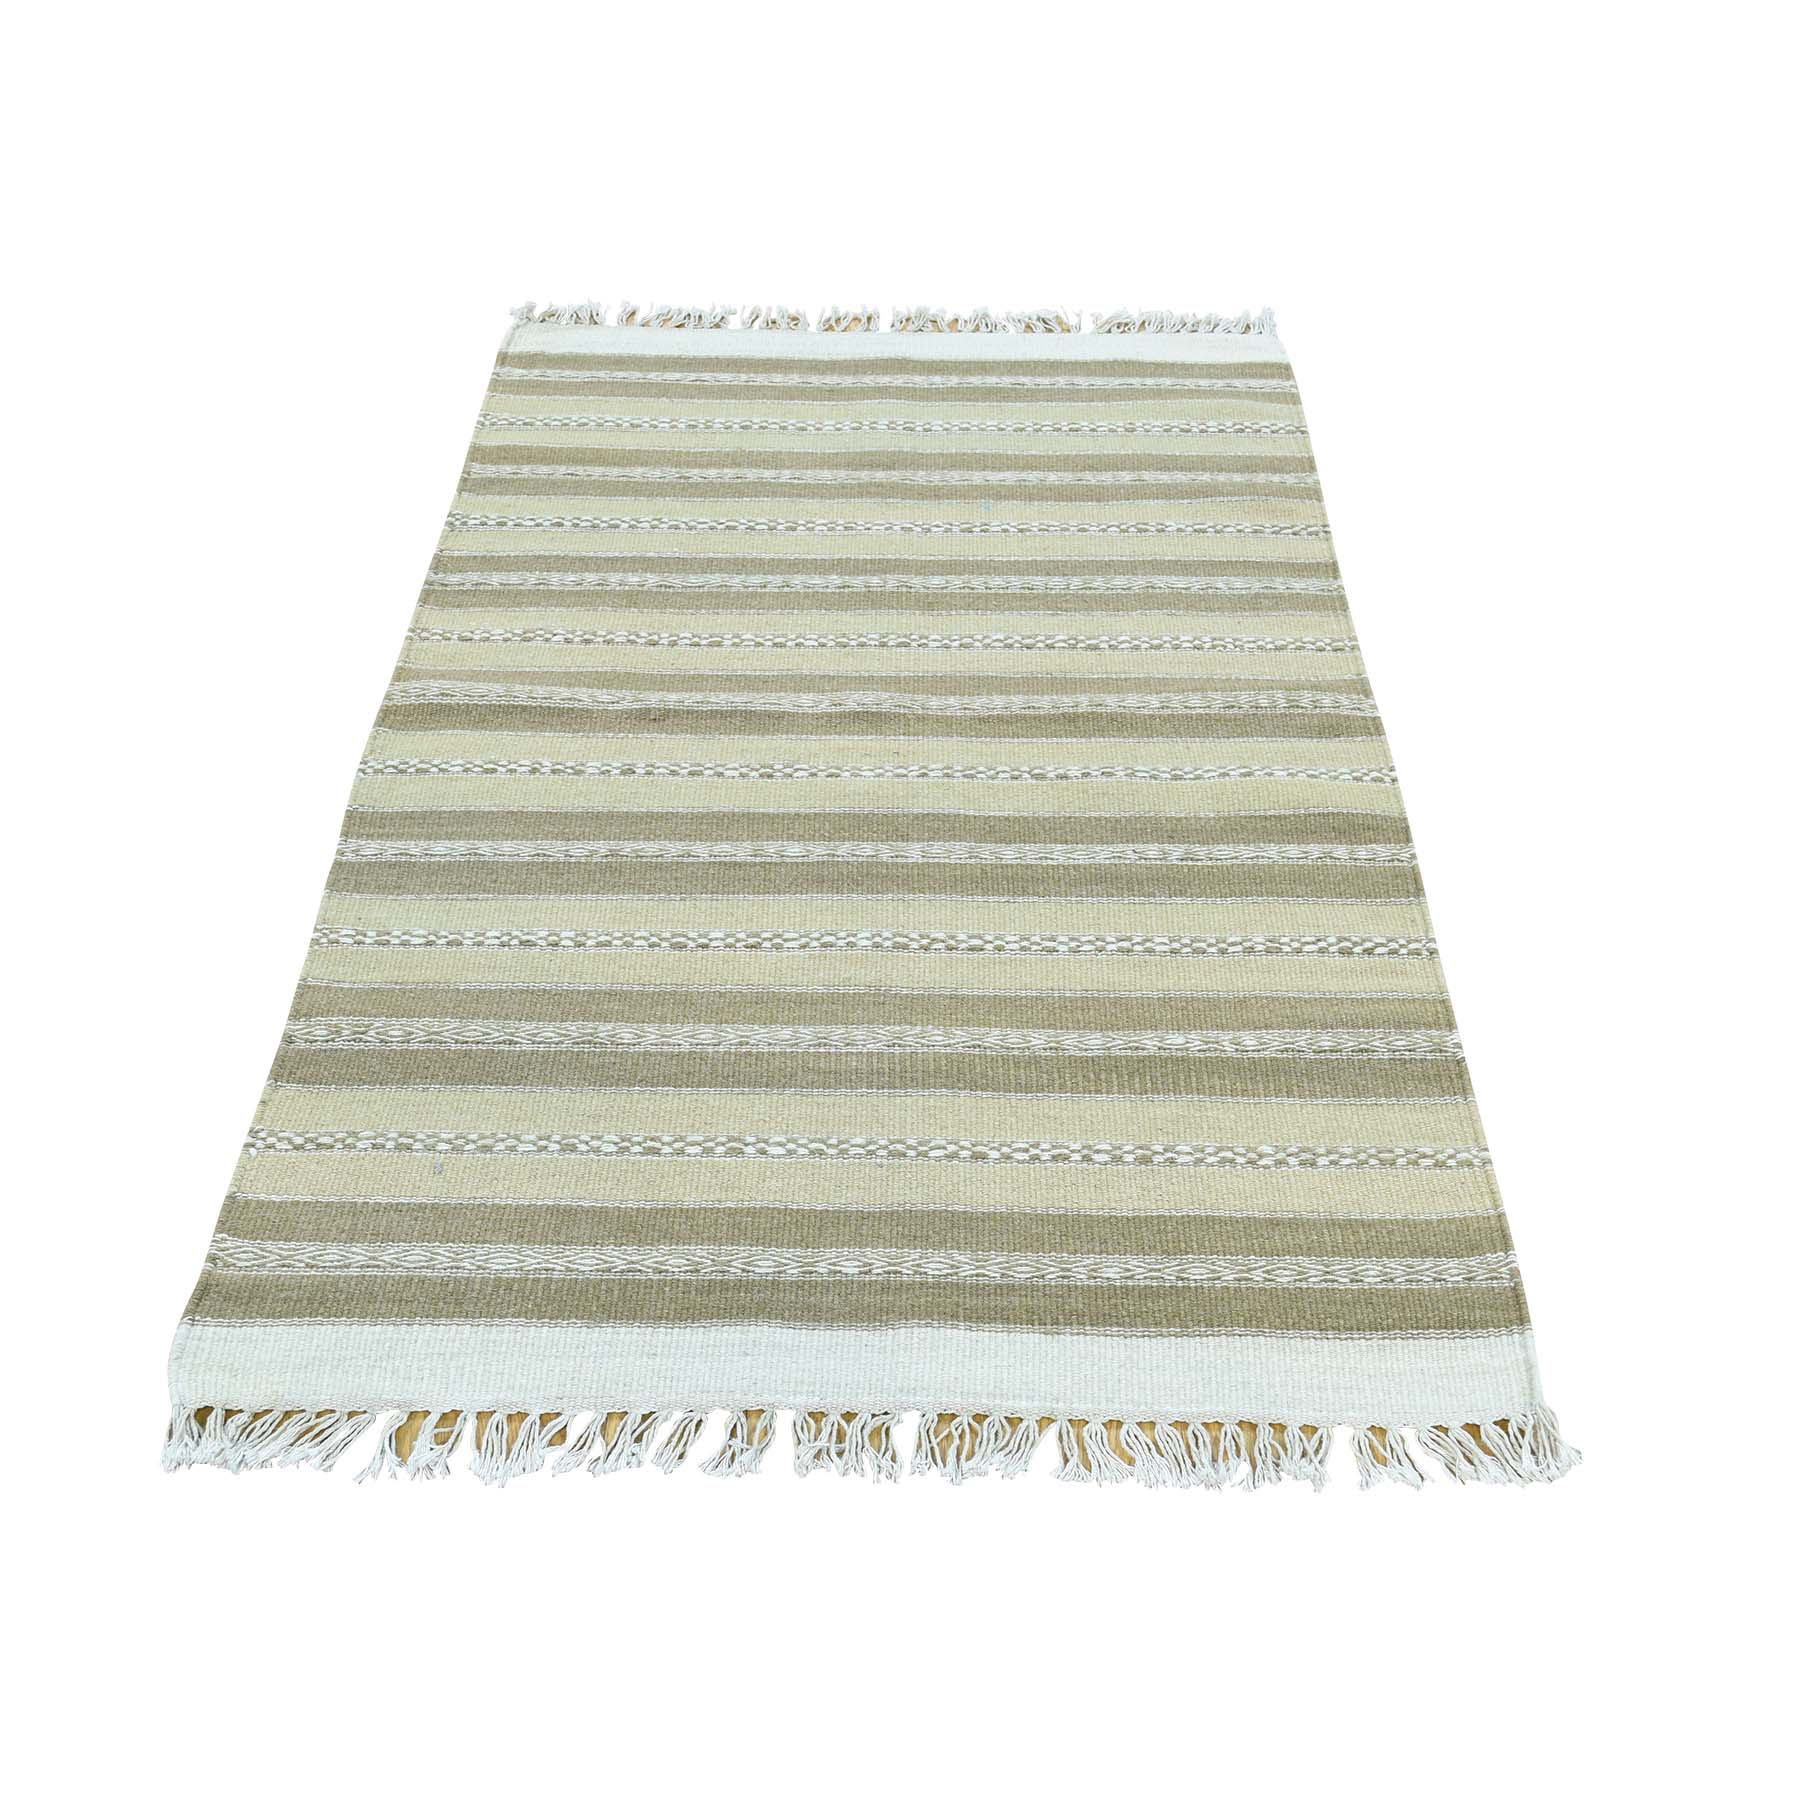 2-9 x4-10  Hand-Woven Durie Kilim Pure Wool Flat Weave Striped Rug 